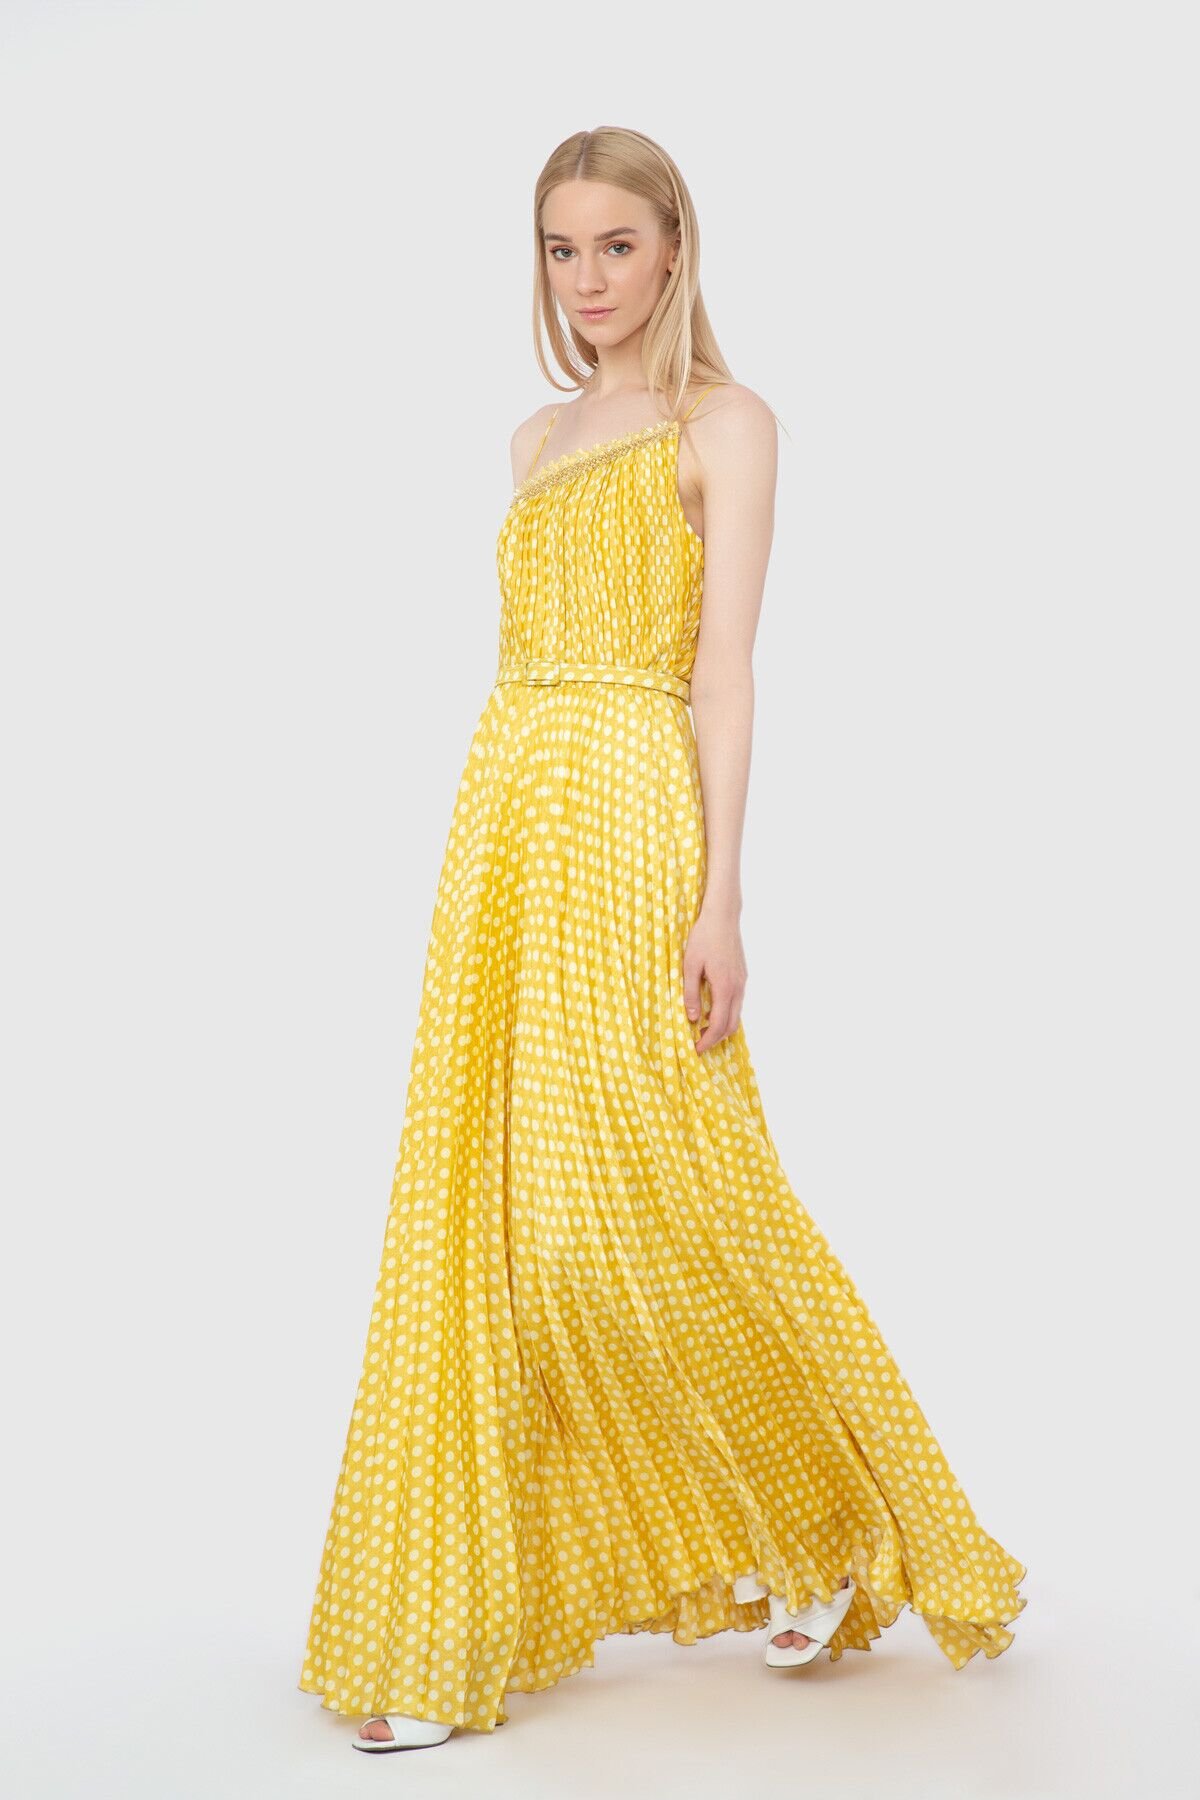 With Stripe Accessory Strap Pleated Yellow Dress 